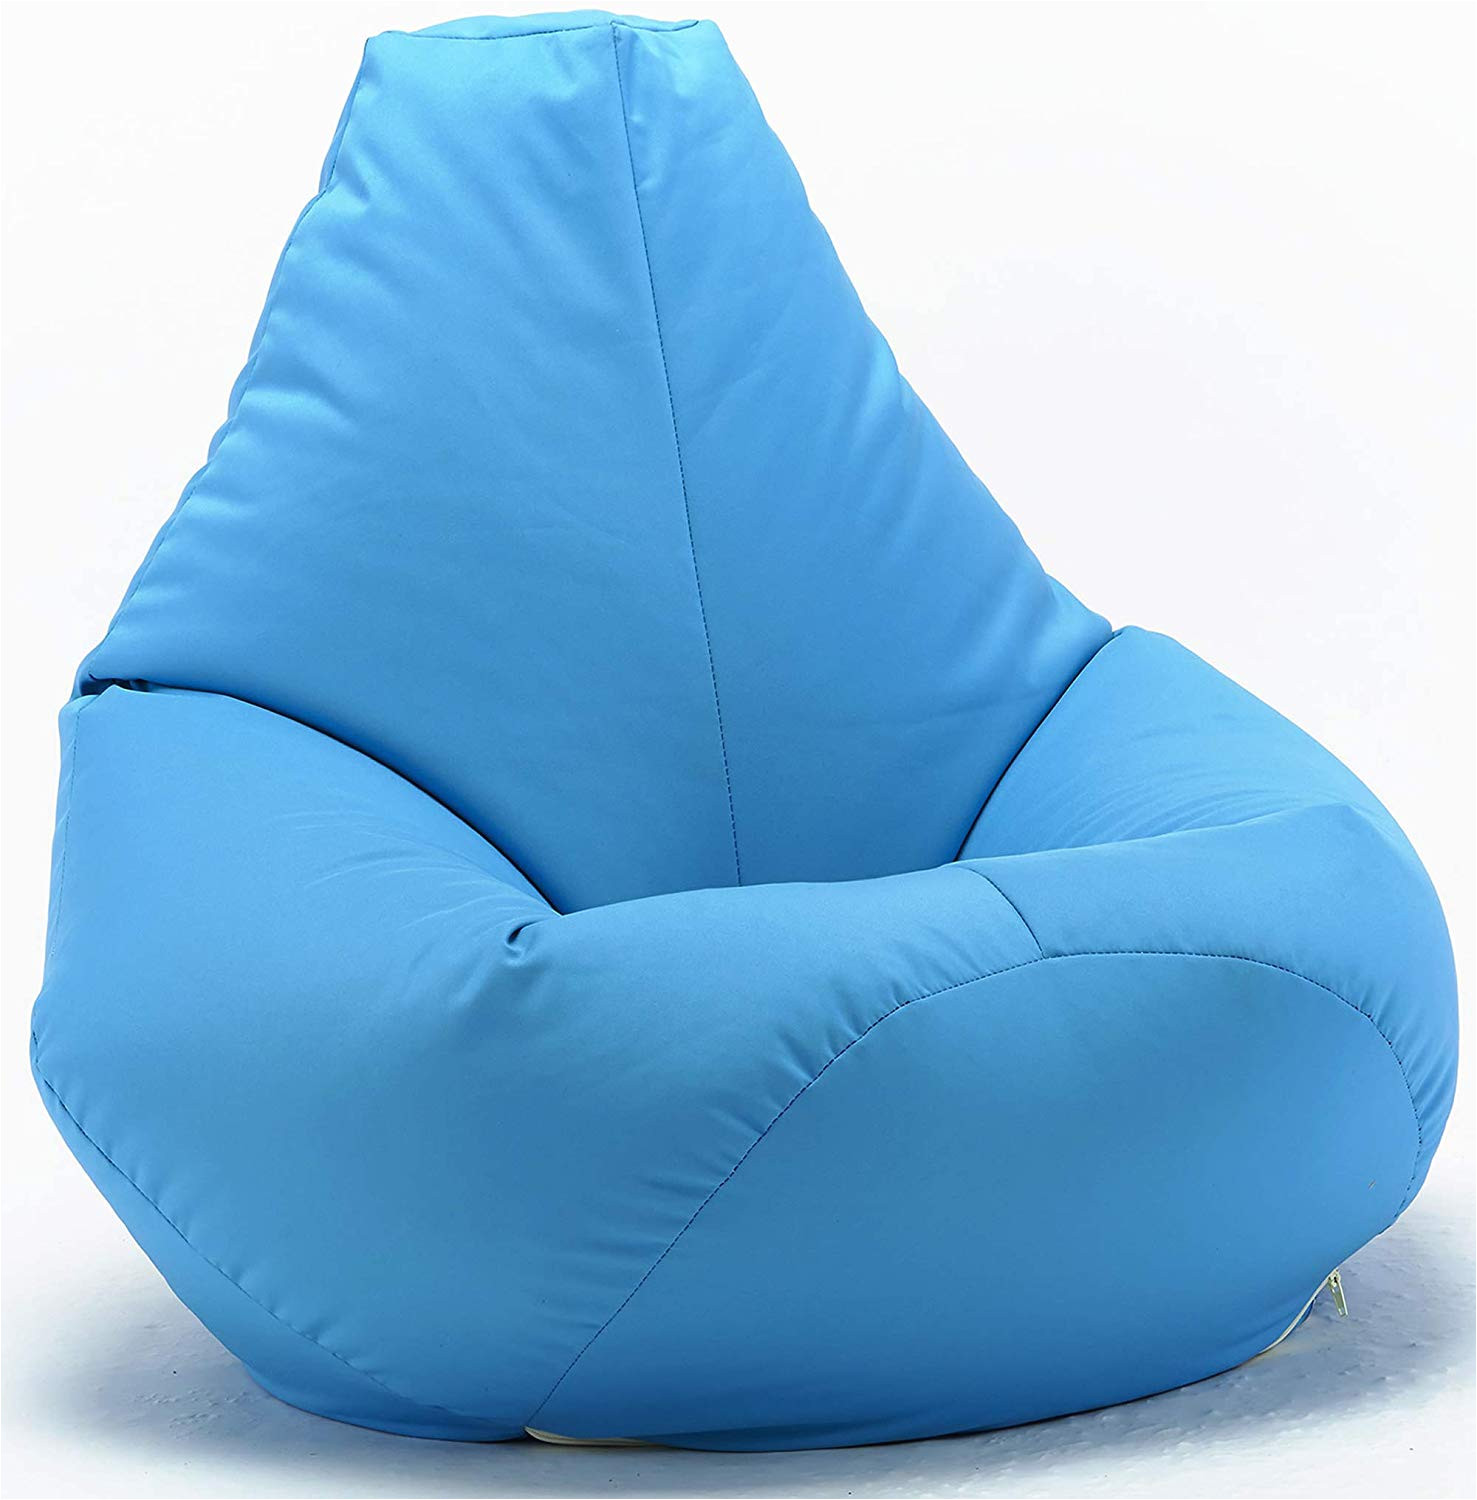 xx l aqua highback beanbag chair water resistant bean bags for indoor and outdoor use great for gaming chair and garden chair amazon co uk garden